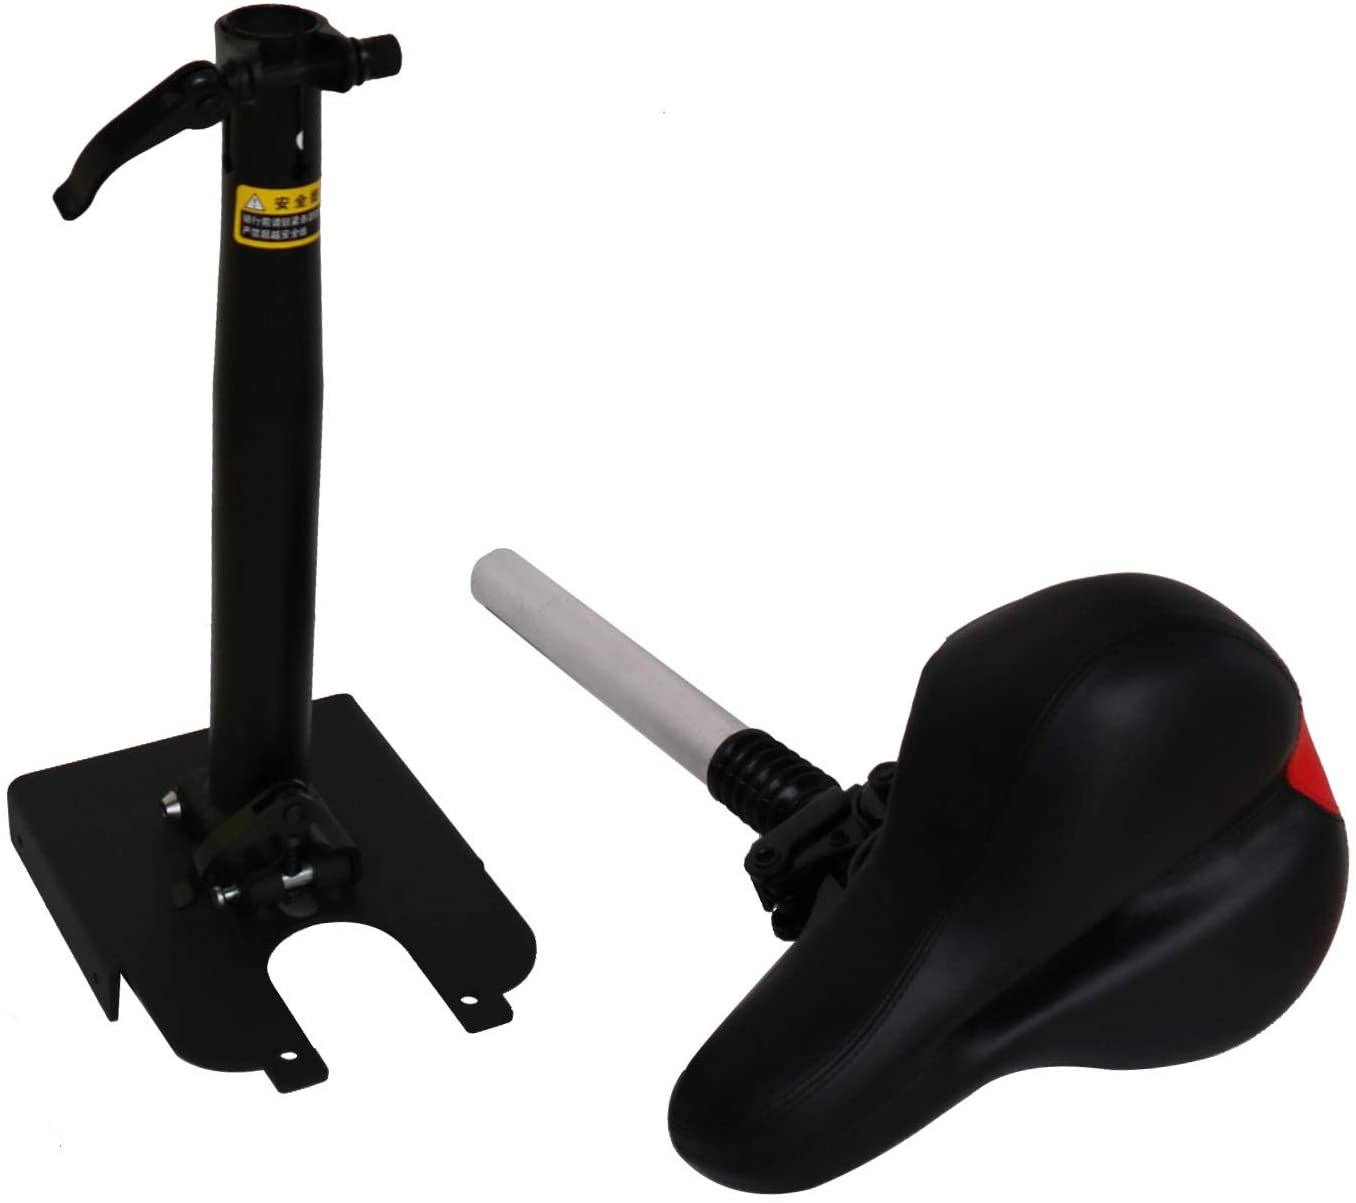 Kickstand Black Stand Feet Support Holder Electric Scooter SEAT (6)